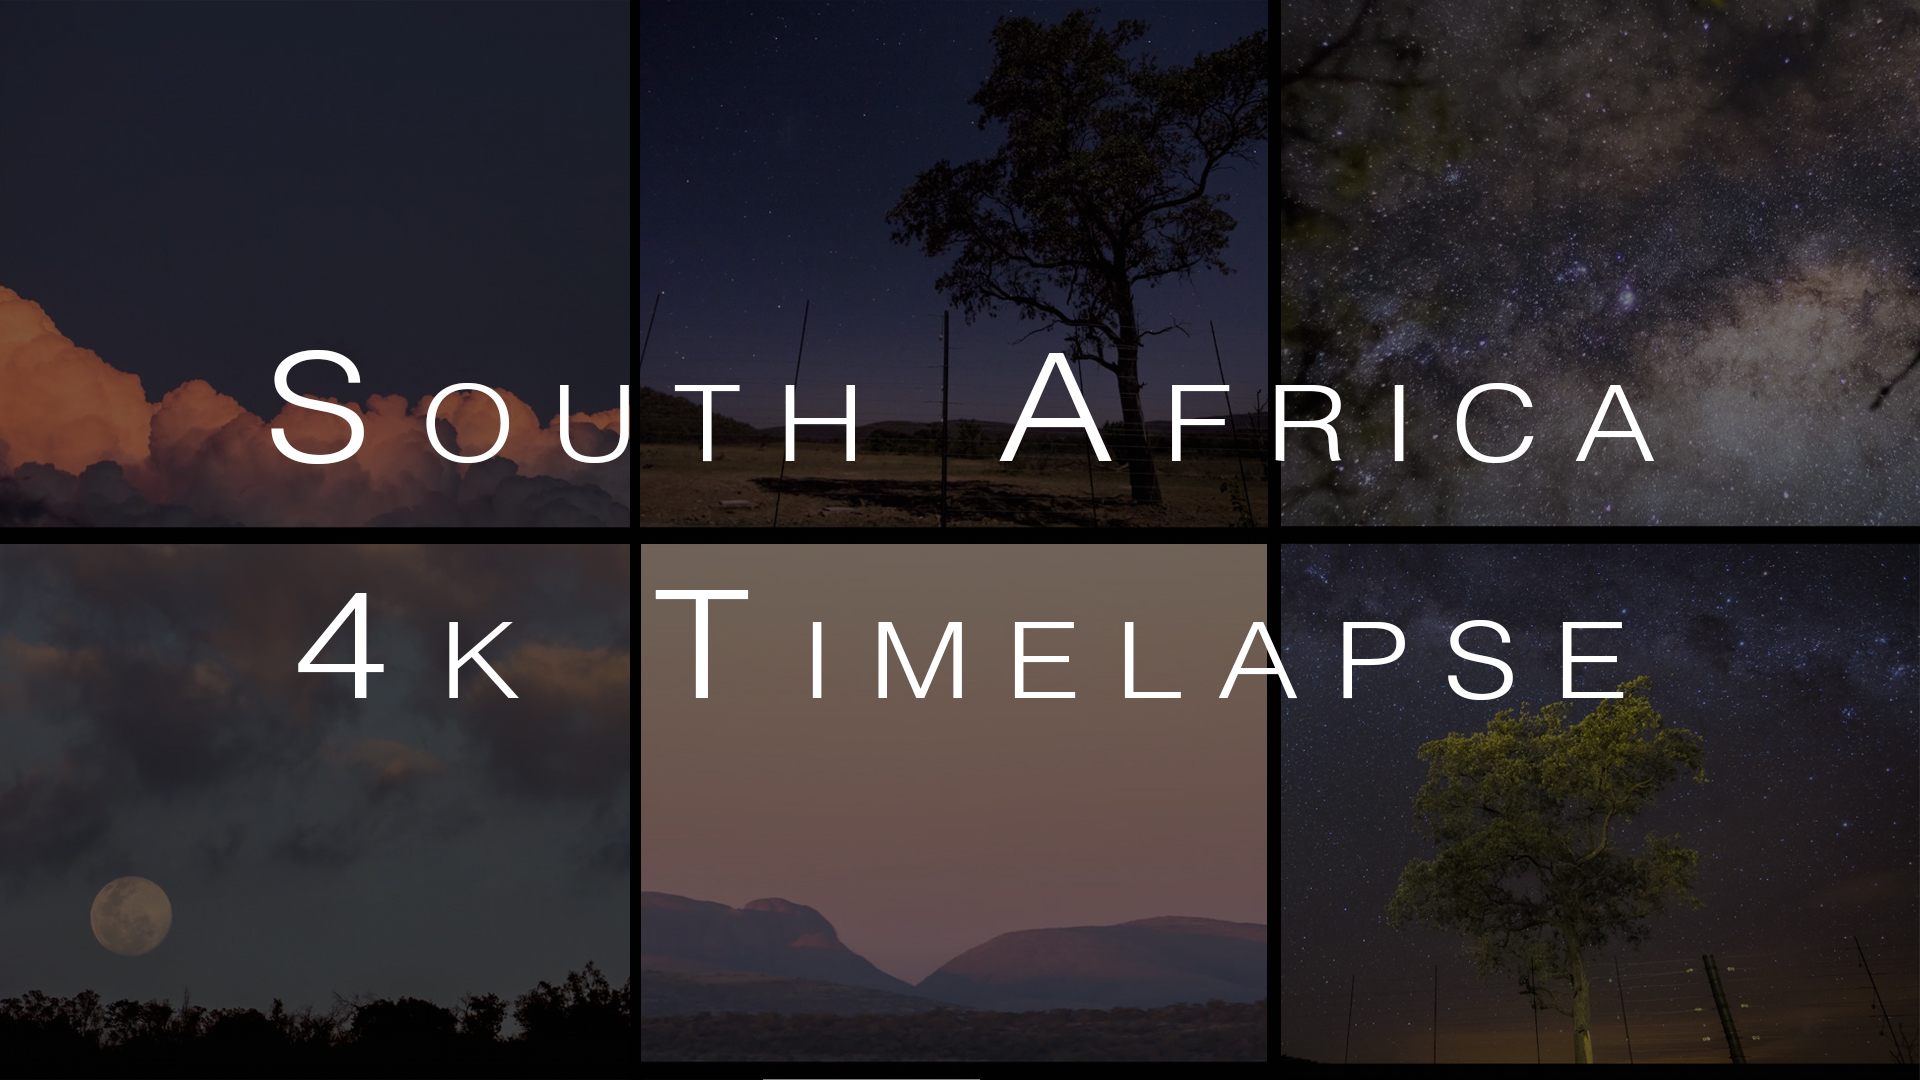 Making the South Africa Timelapse